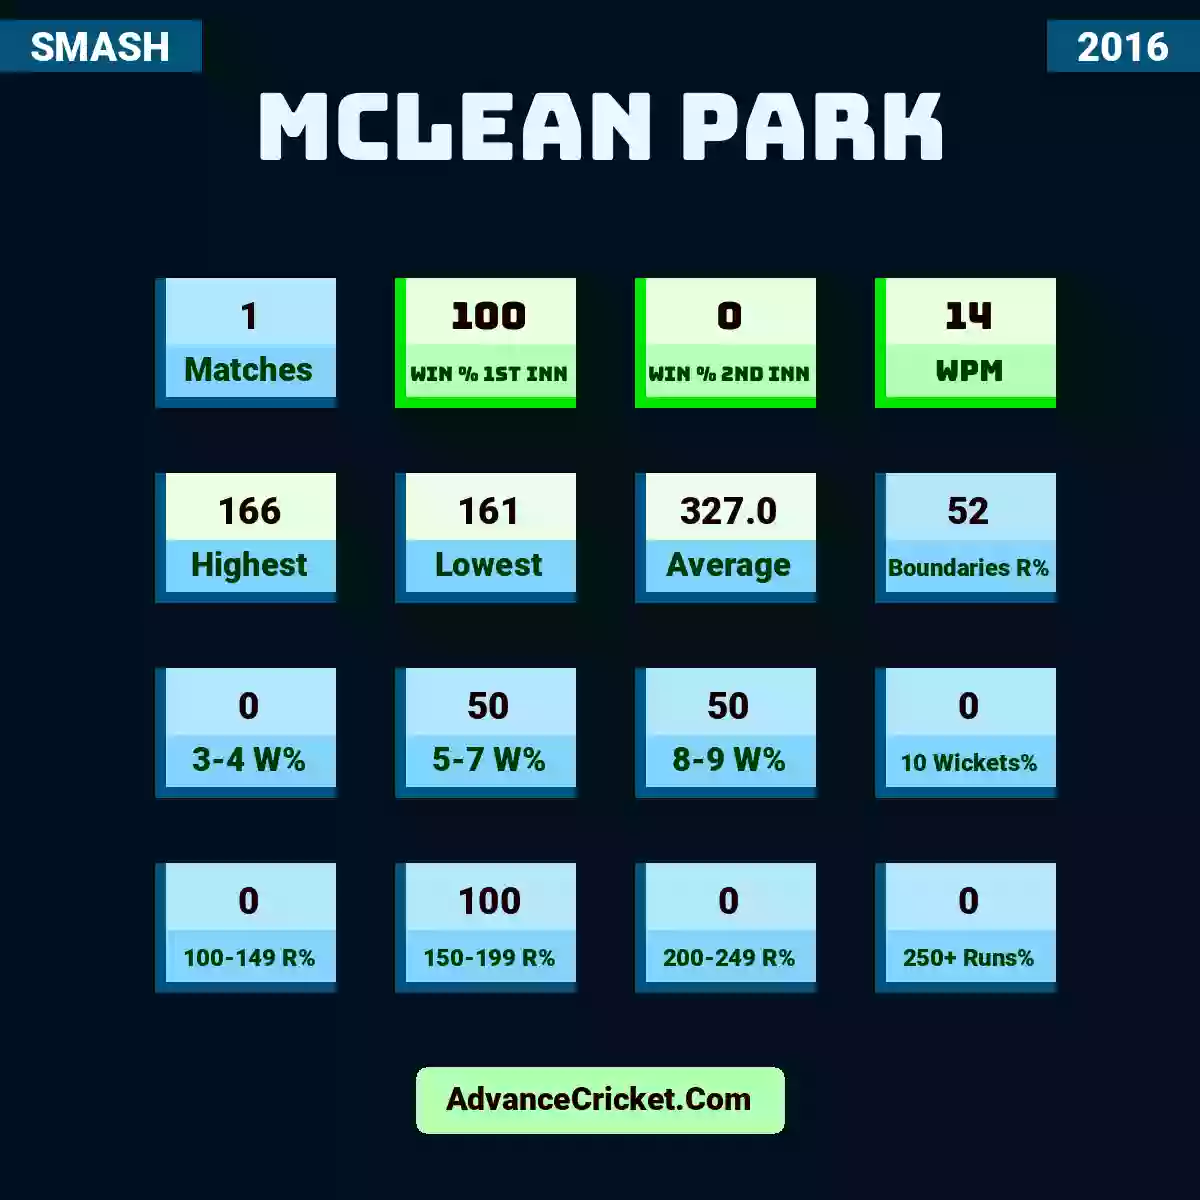 Image showing McLean Park with Matches: 1, Win % 1st Inn: 100, Win % 2nd Inn: 0, WPM: 14, Highest: 166, Lowest: 161, Average: 327.0, Boundaries R%: 52, 3-4 W%: 0, 5-7 W%: 50, 8-9 W%: 50, 10 Wickets%: 0, 100-149 R%: 0, 150-199 R%: 100, 200-249 R%: 0, 250+ Runs%: 0.